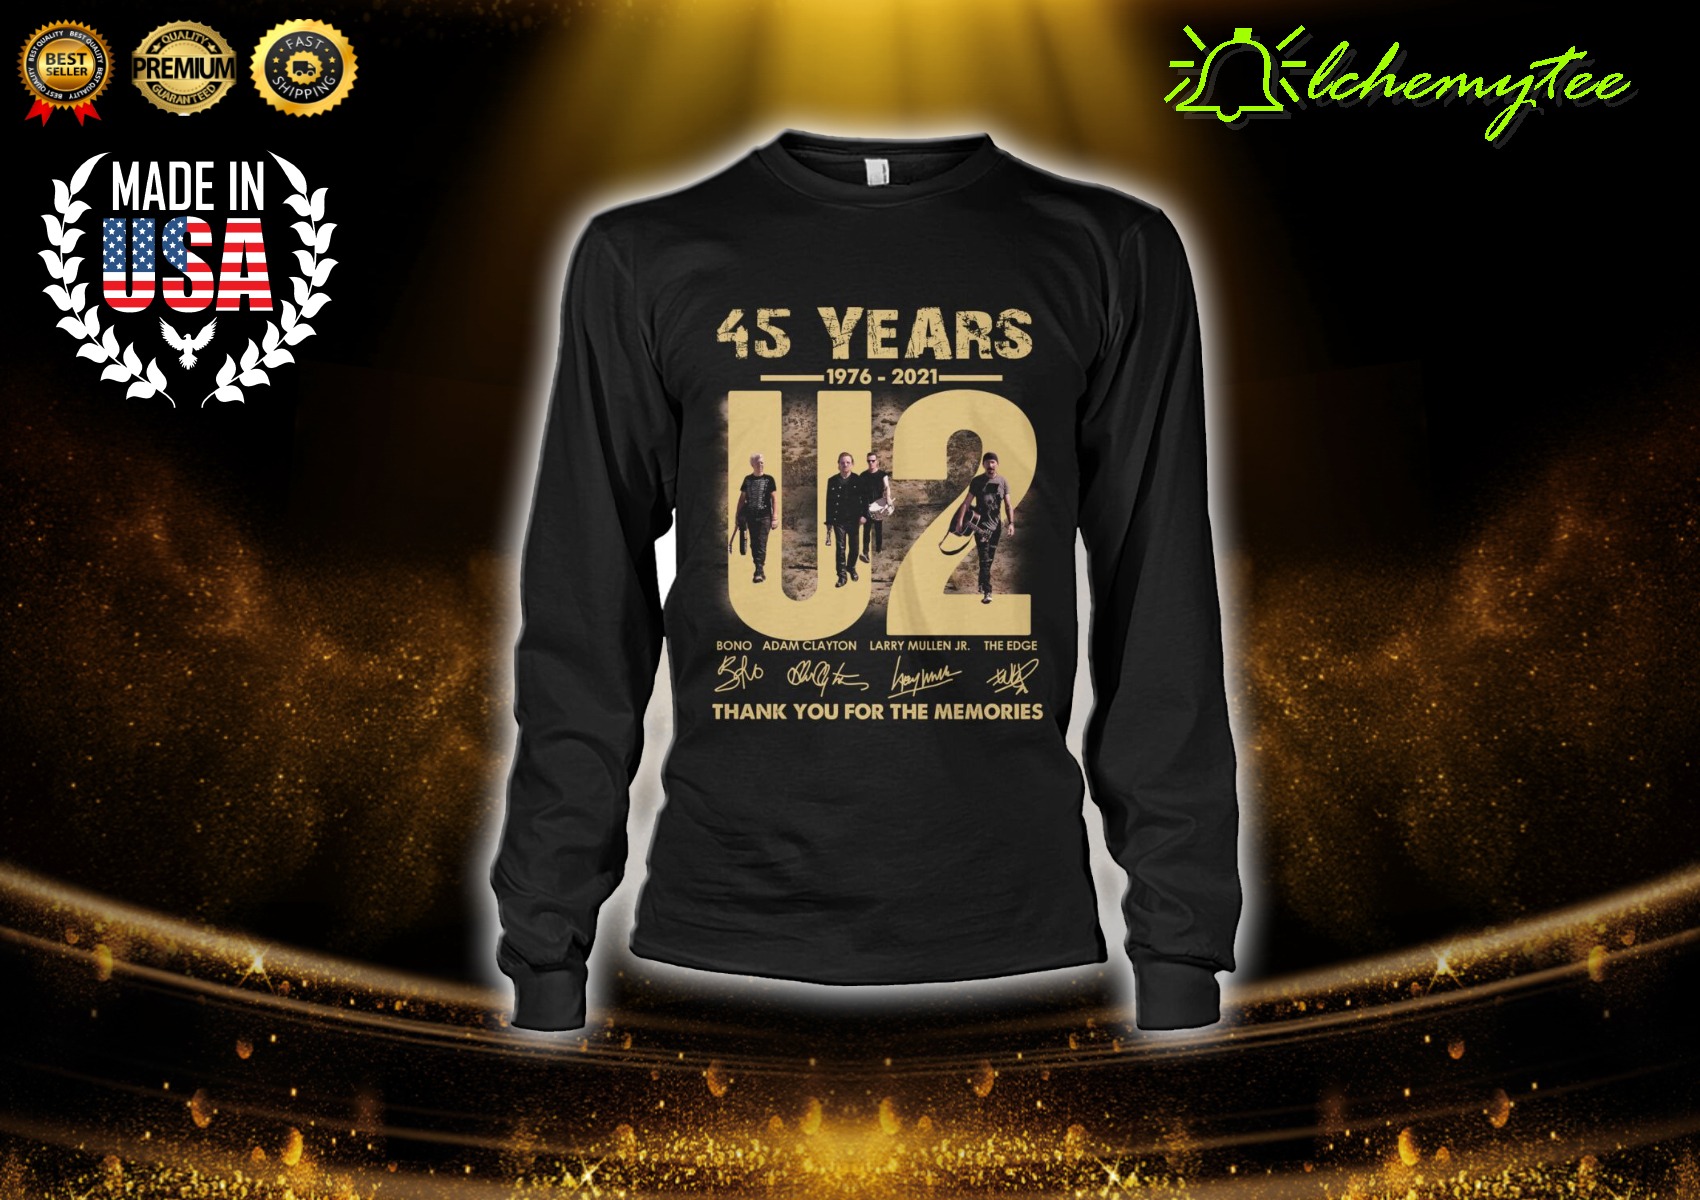 45 Years 1976 2021 U2 Thank You For The Memories Shirt And Hoodie